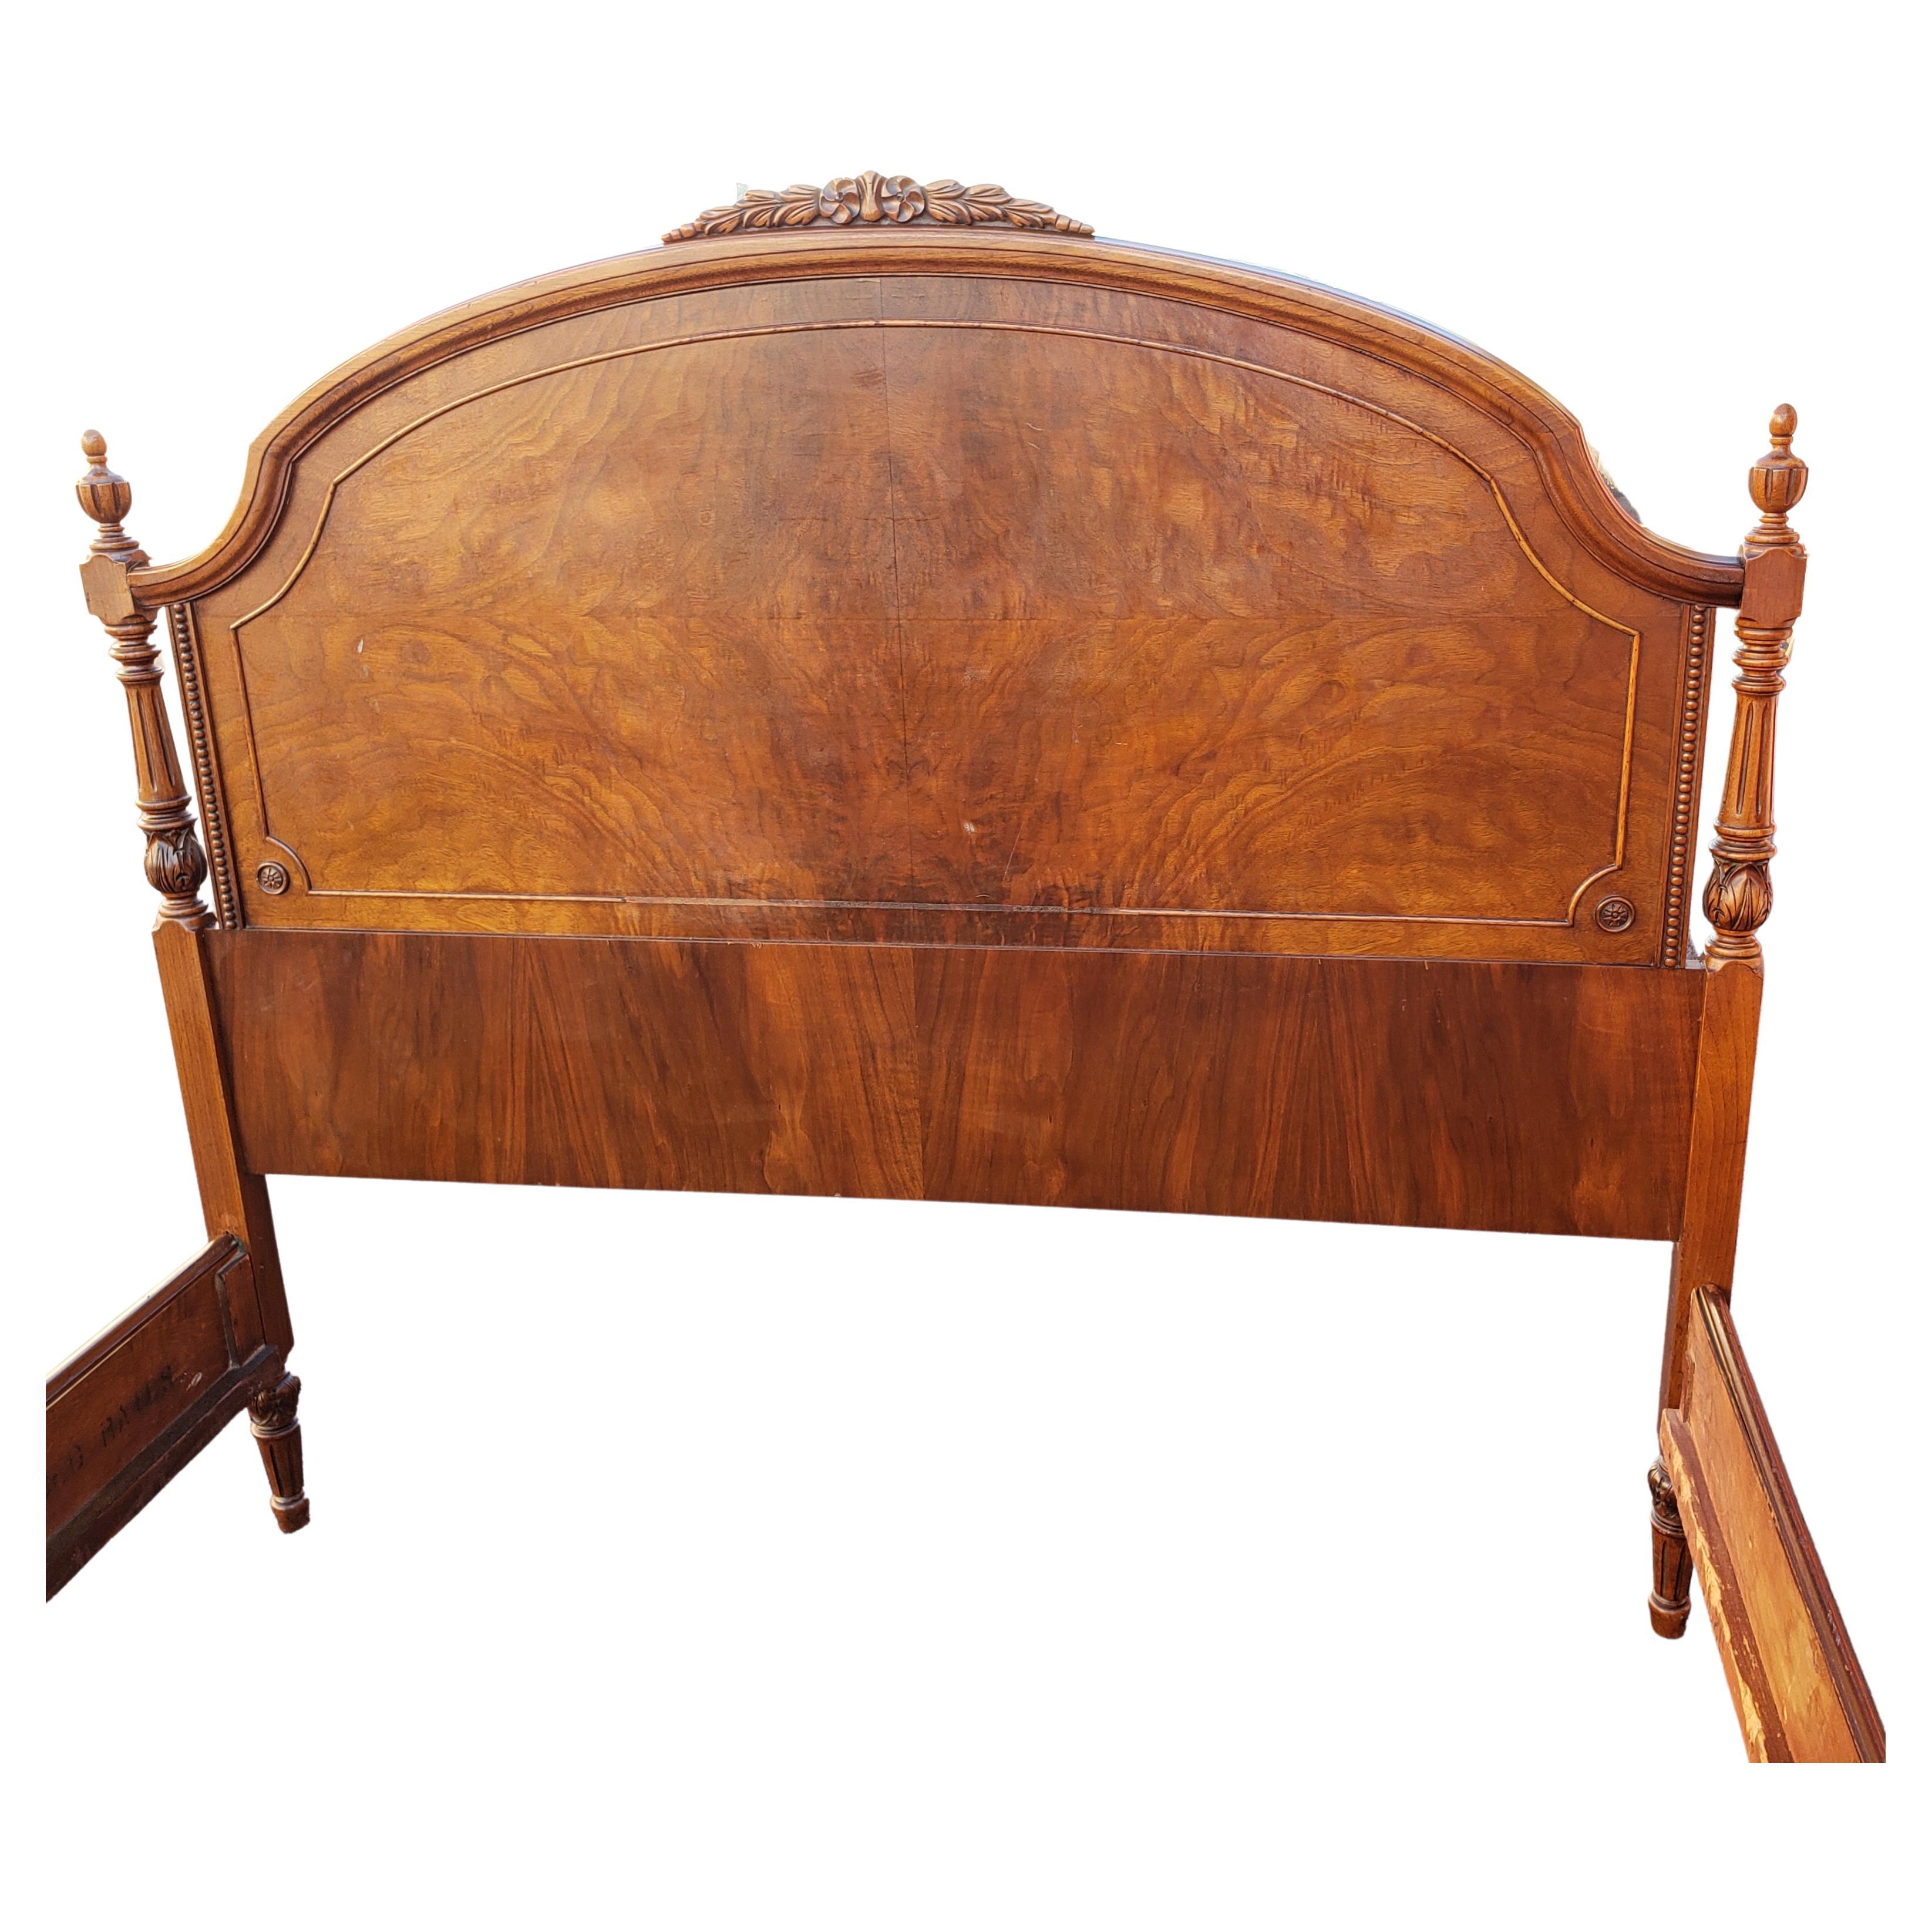 This is a full size vintage renaissance French bed. Circa 1920s by the famous Phenix Furniture of Warren, Pennsylvania. Intricate carvings on walnut and walnut burl veneers. An amazing combination of perennial style, elegance. A true representation